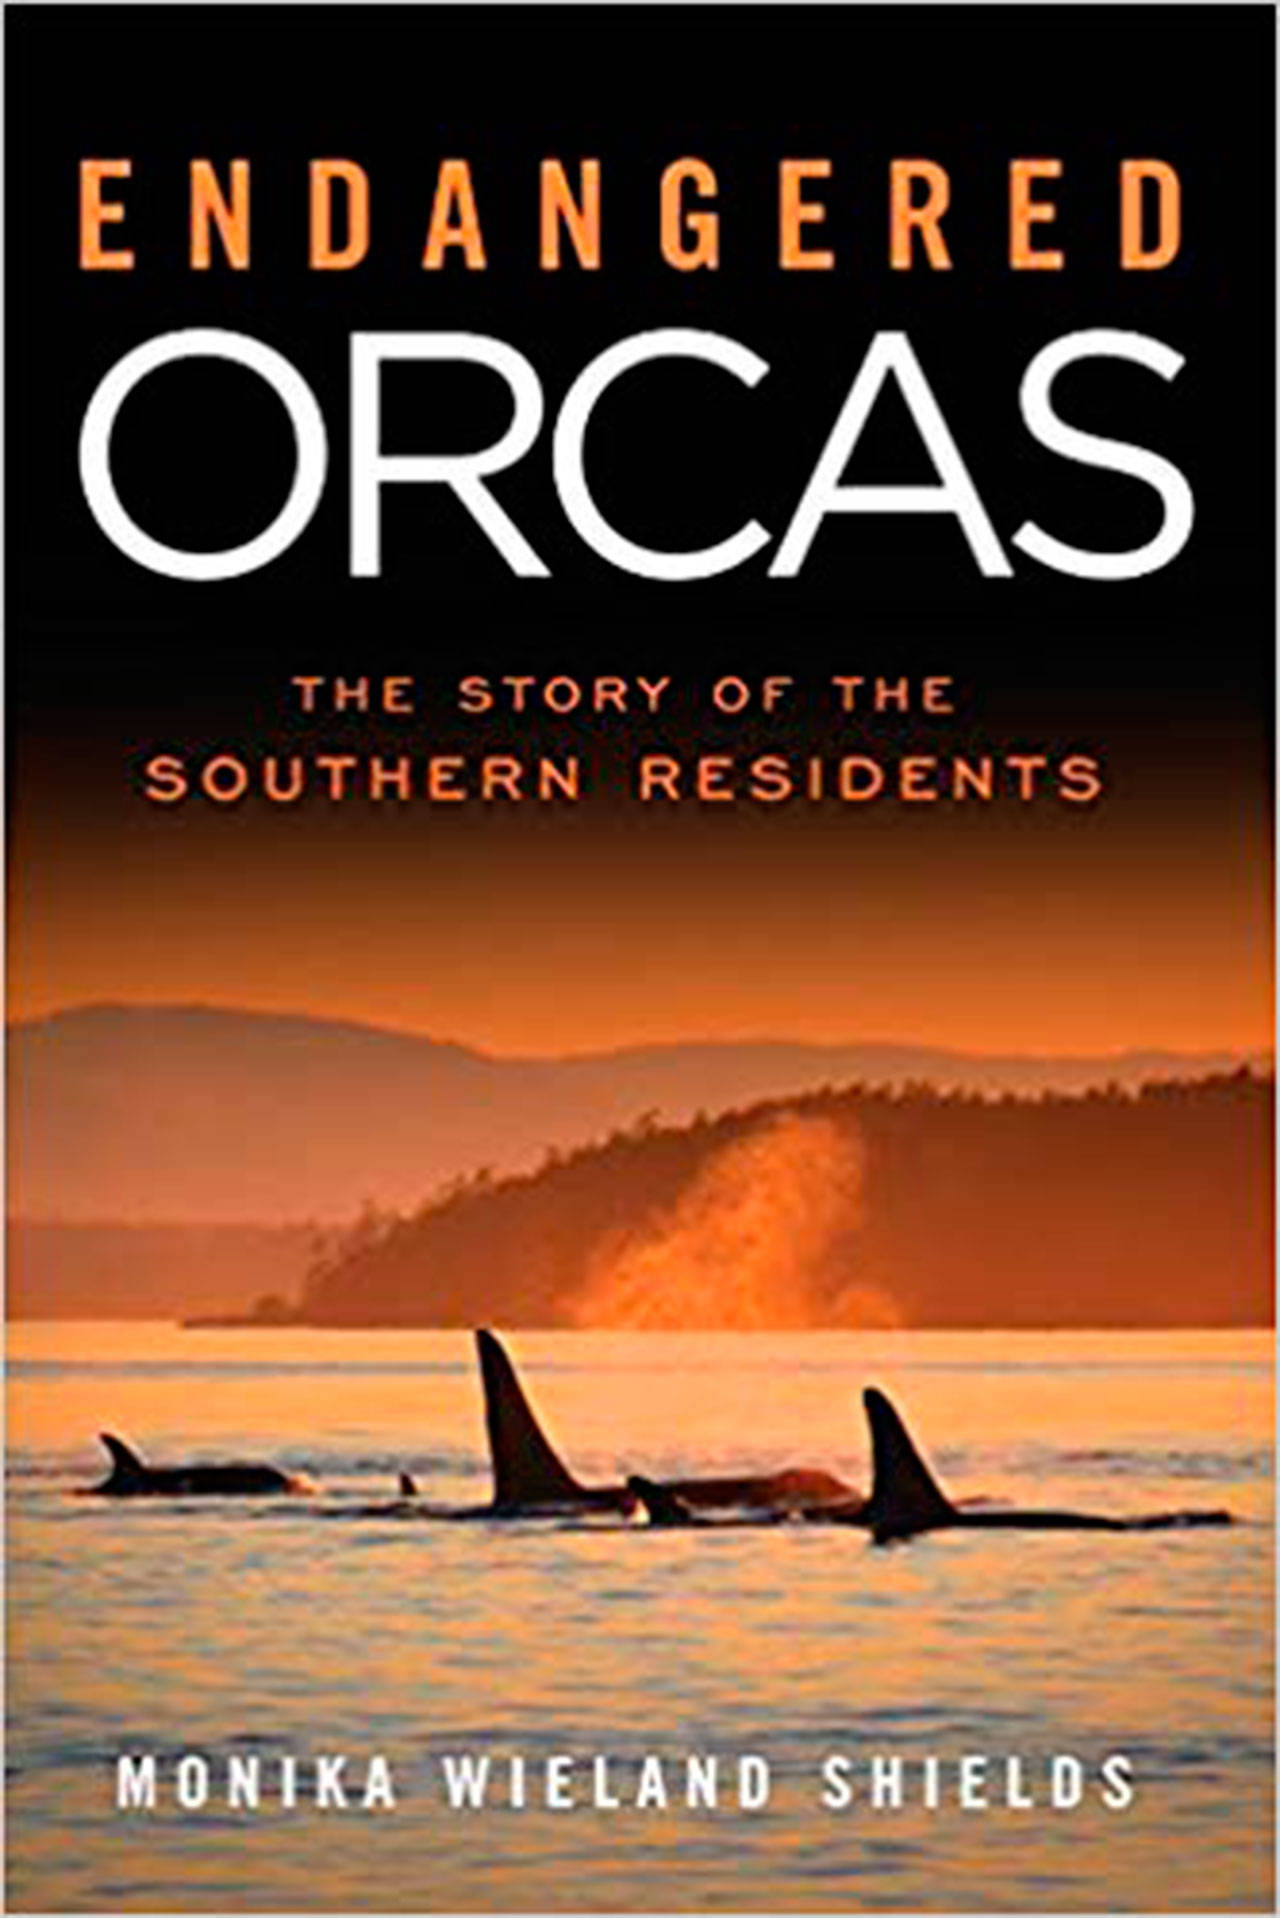 Image courtesy of Eagle Harbor Book Company | Monika Wieland will visit Eagle Harbor Book Company at 6:30 p.m. Thursday, Aug. 8 to discuss her new book “Endangered Orcas: The Story of the Southern Residents.”